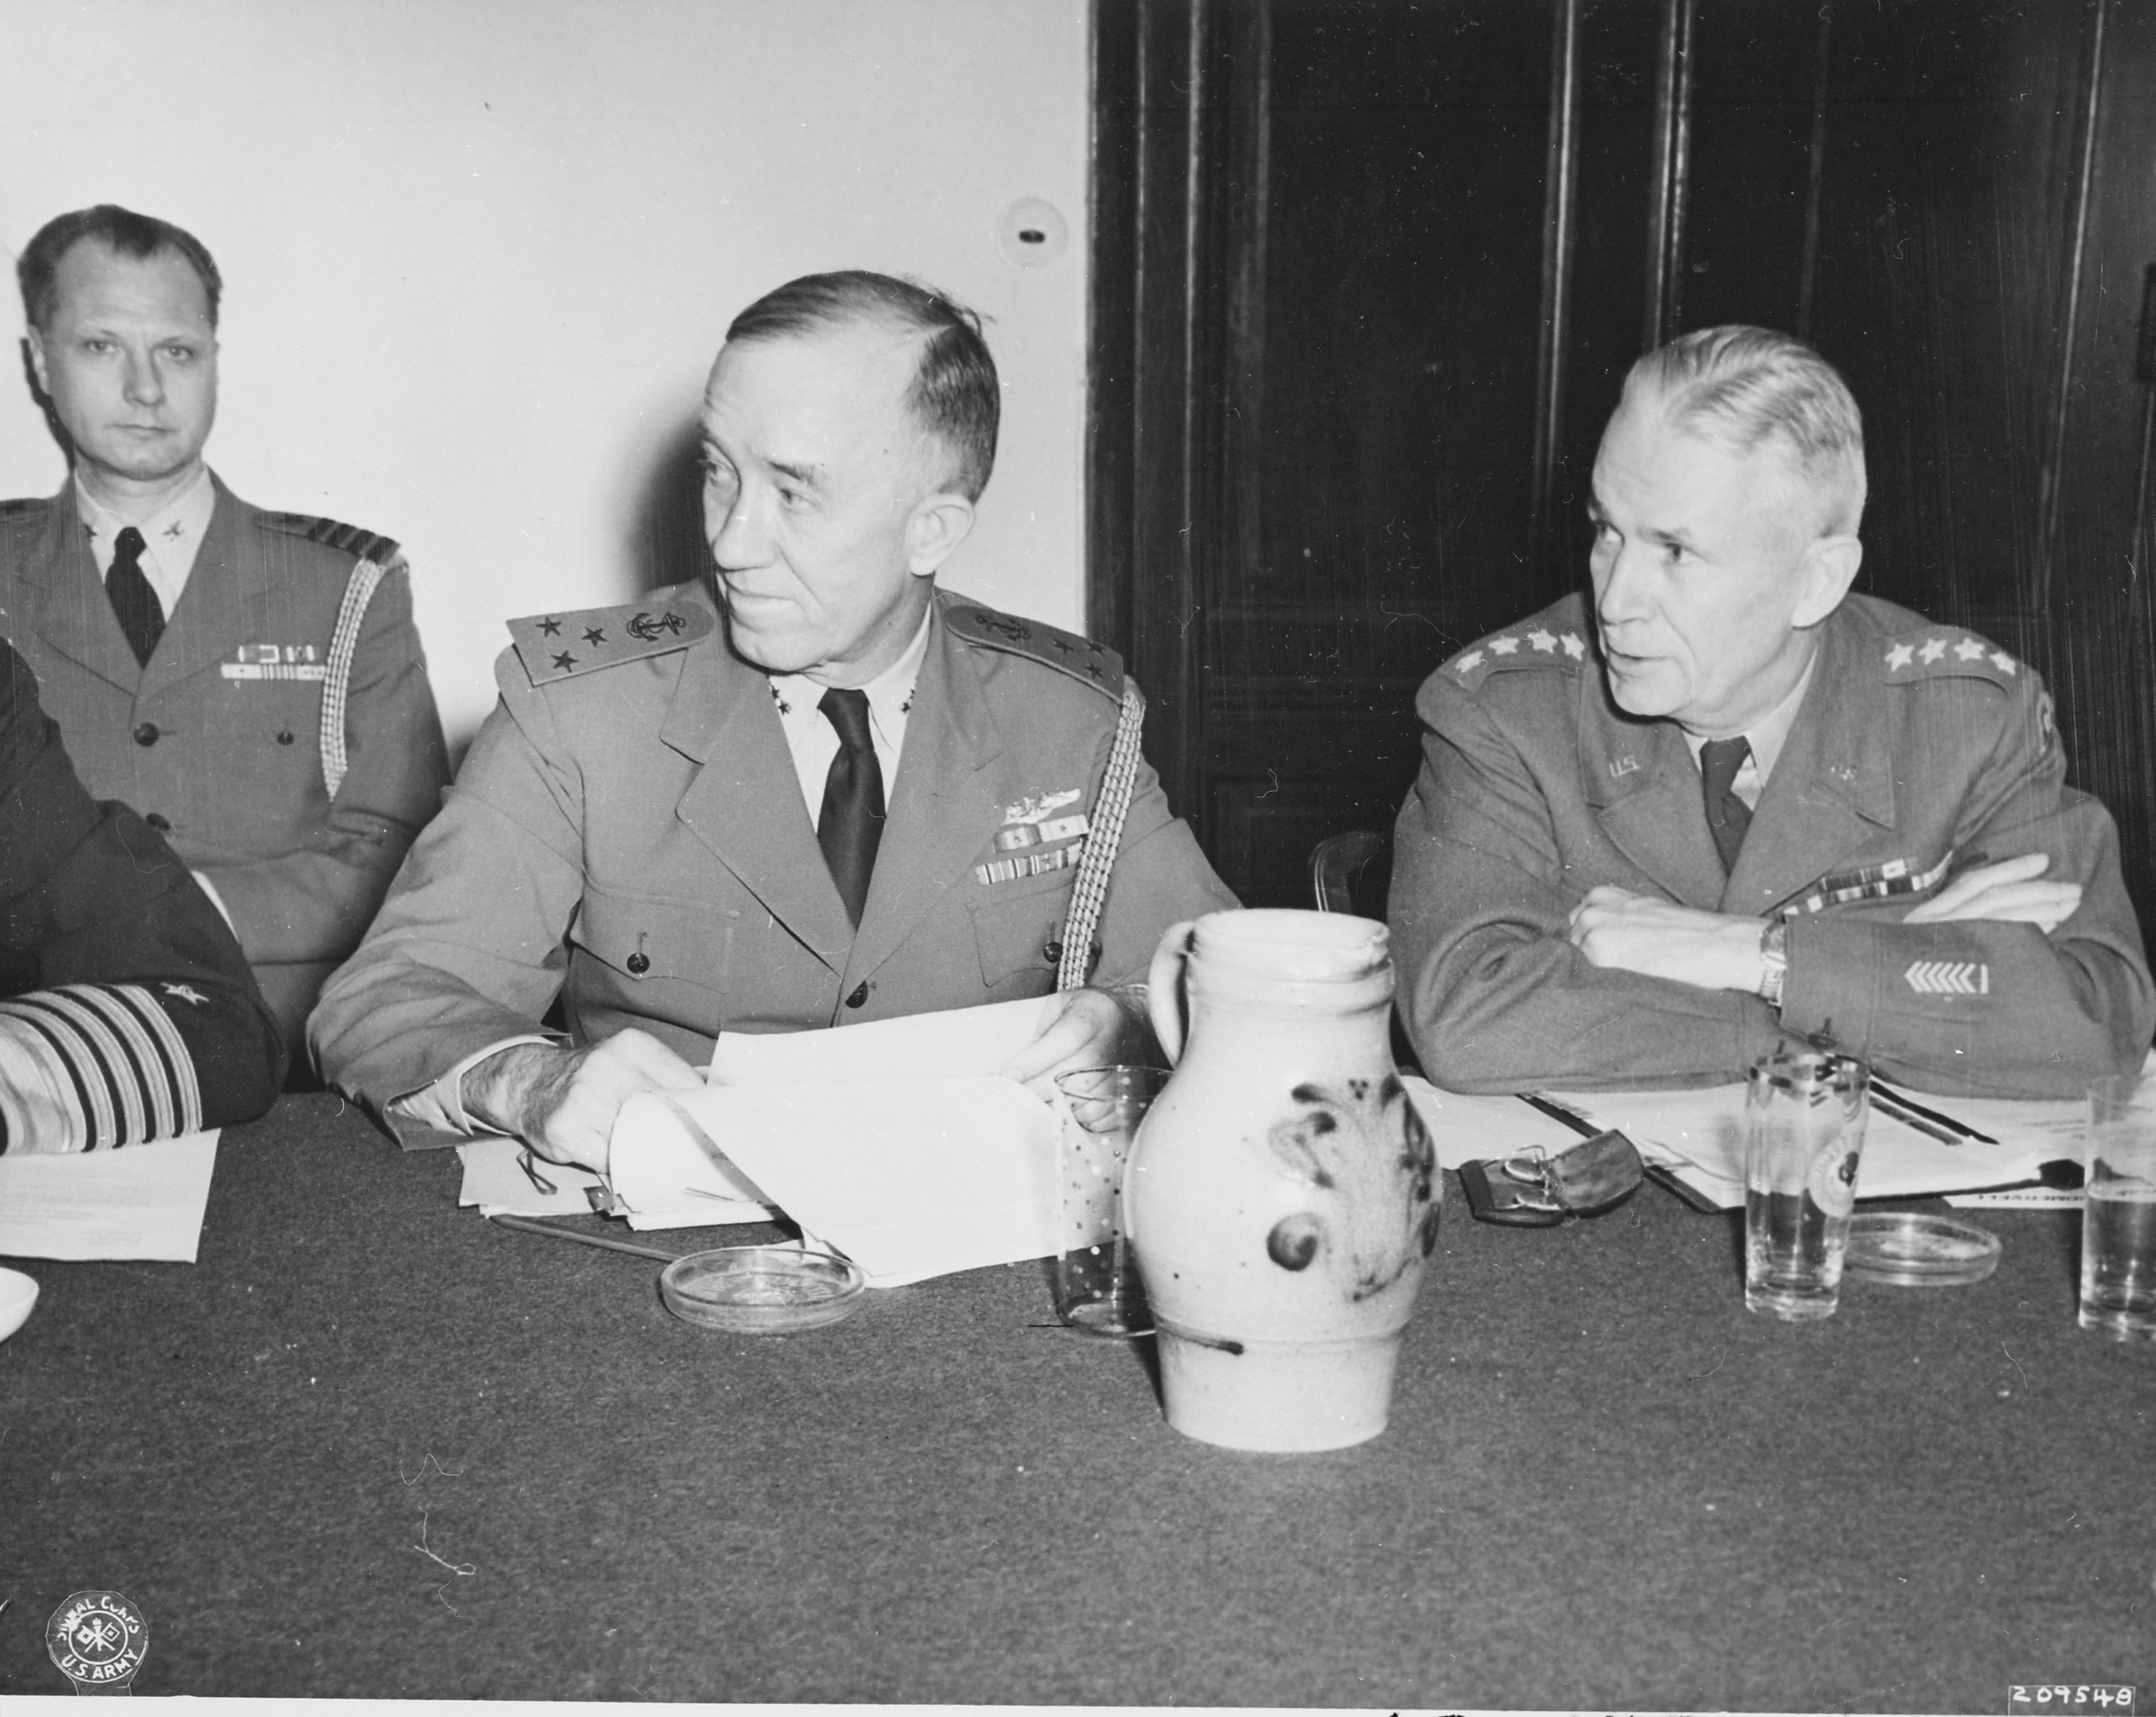 Vice Admiral C. M. Cooke, Jr. and General Brehon Somervell at a meeting during the Potsdam Conference, Germany, 21 Jul 1945